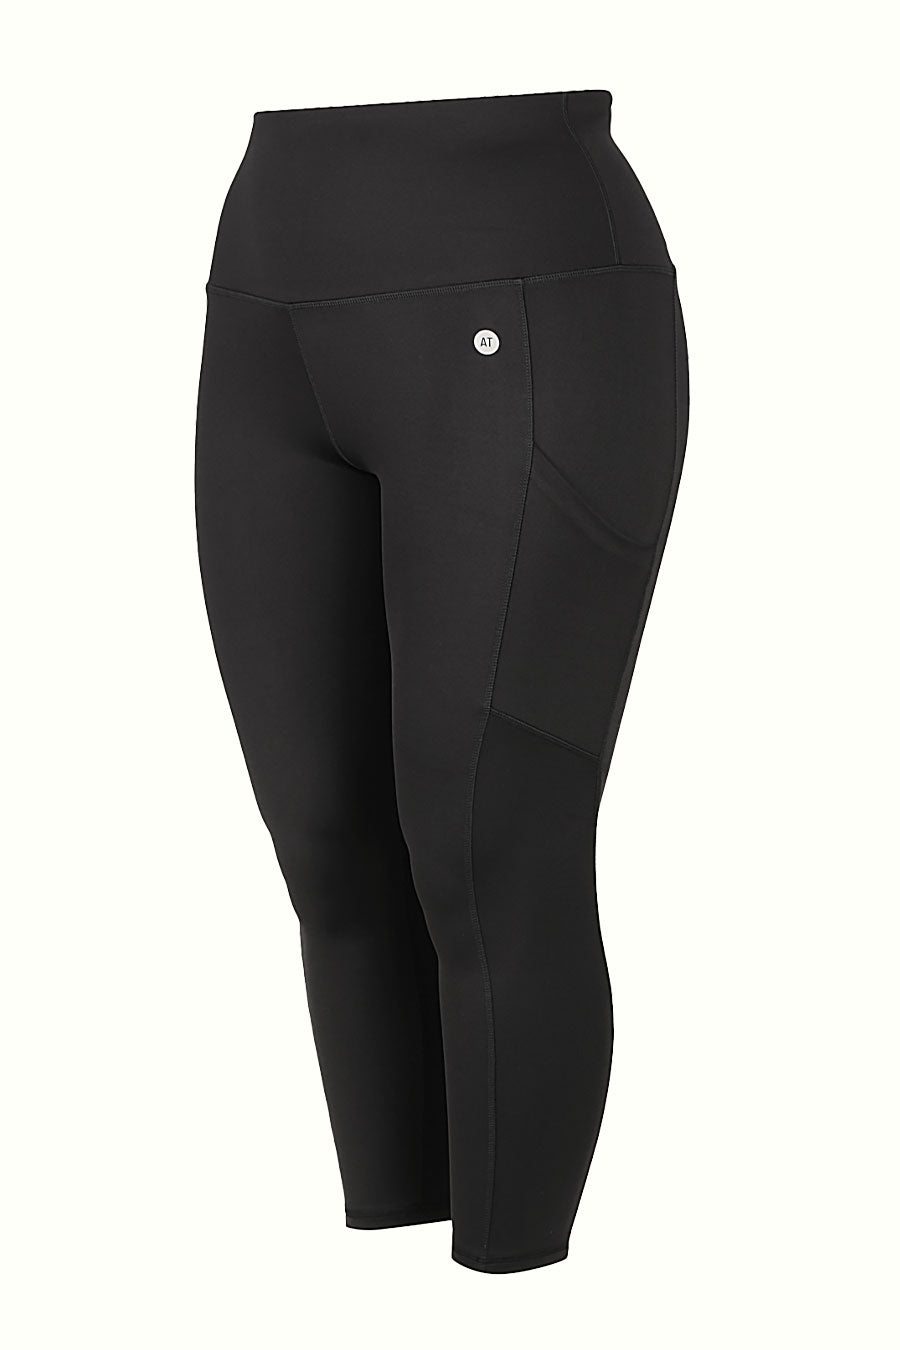 Lululemon Black/White/Grey Stripped Front Zipper Leggings With Side Me –  The Saved Collection